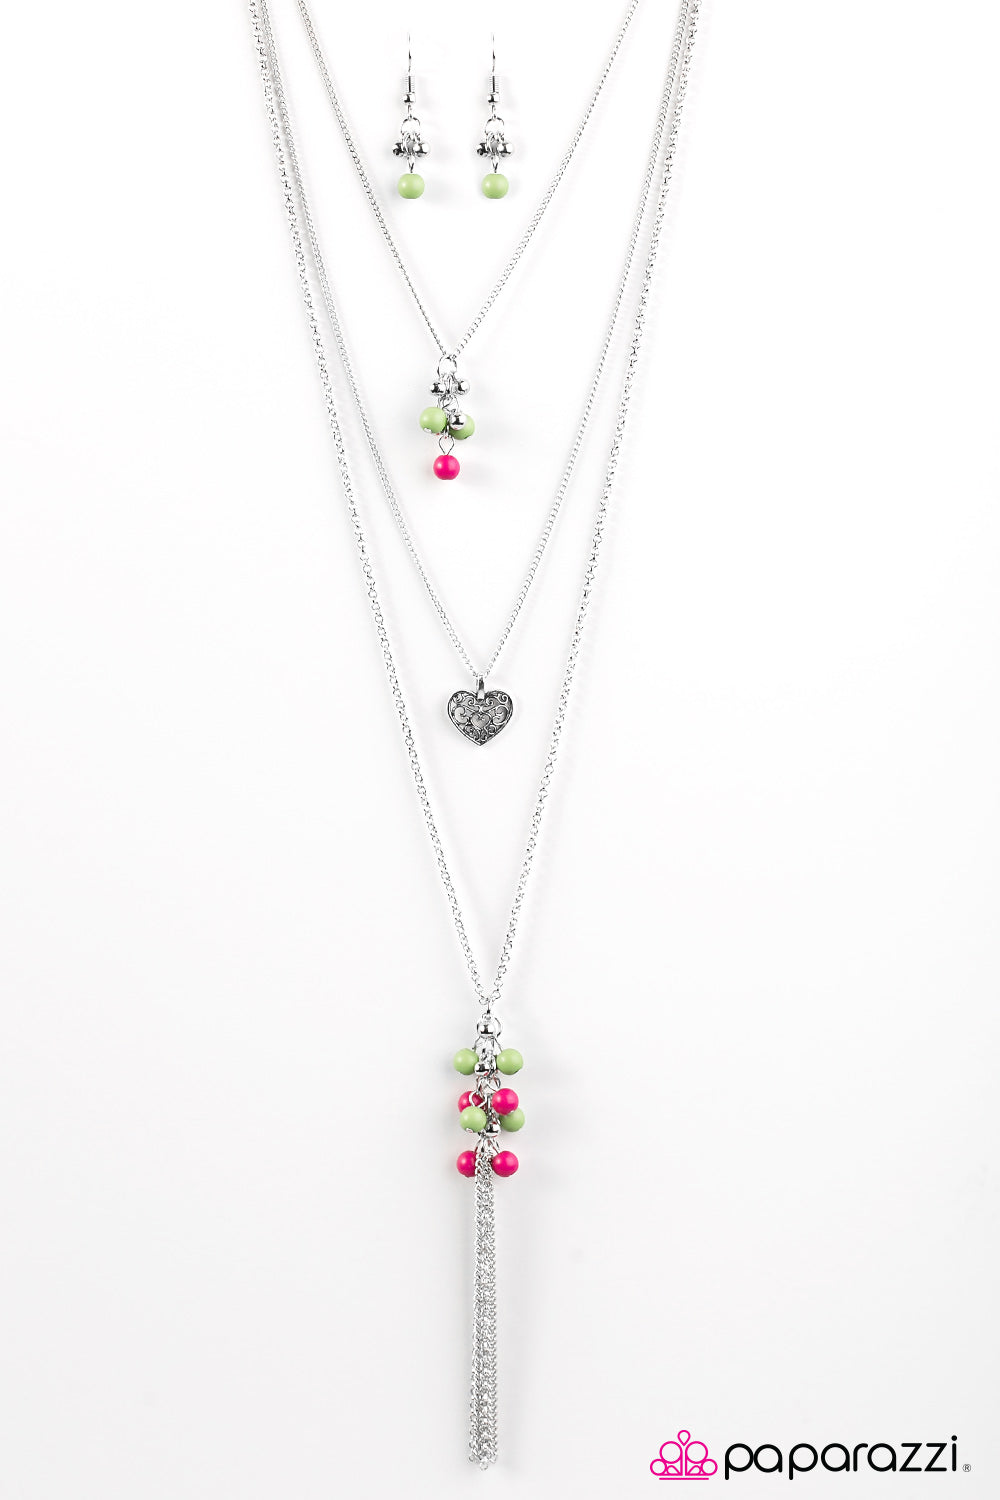 Paparazzi ♥ Whats Not To Love? - Multi ♥  Necklace